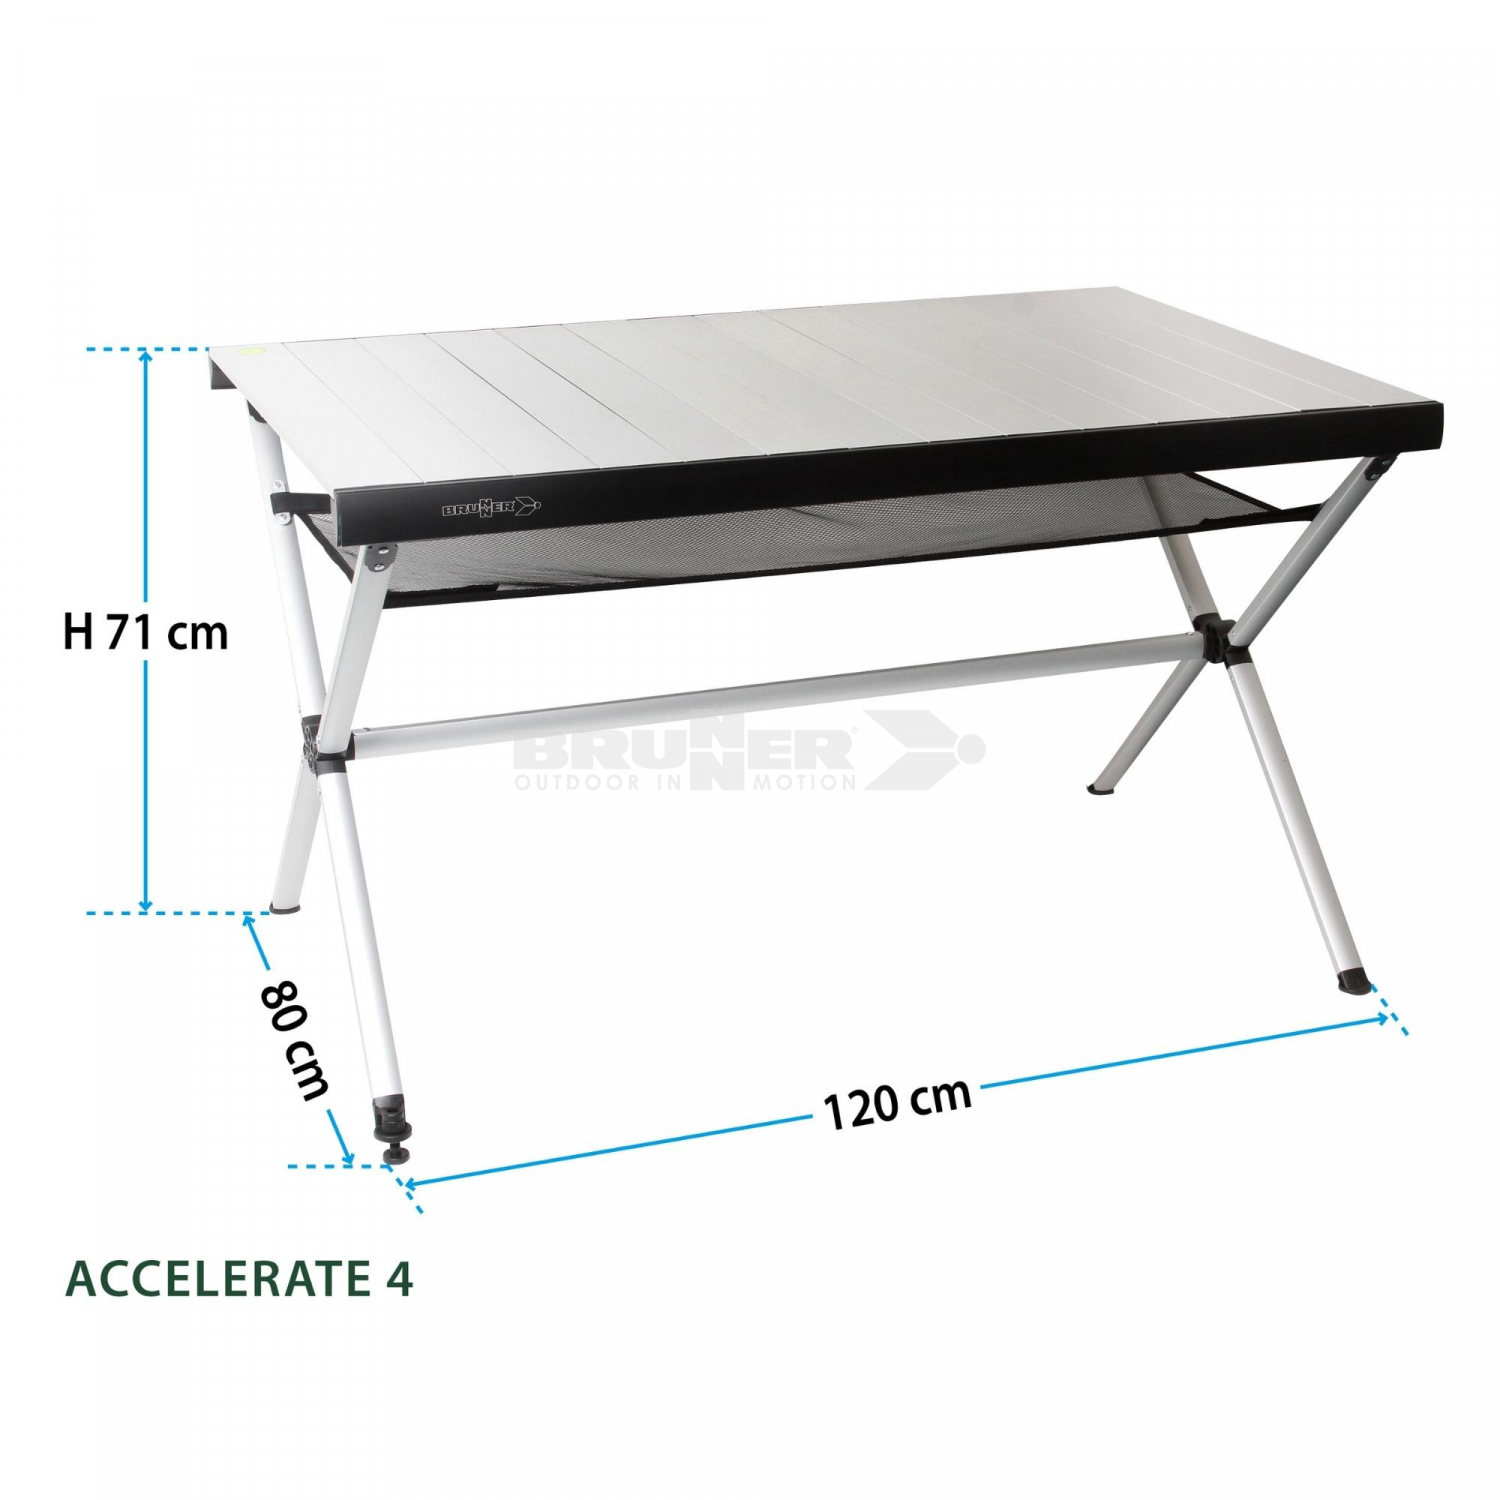 Camping Brunner Alu Table pliante valise Table Table De Camping 120 x 62 x 70 cm Bayla 4 